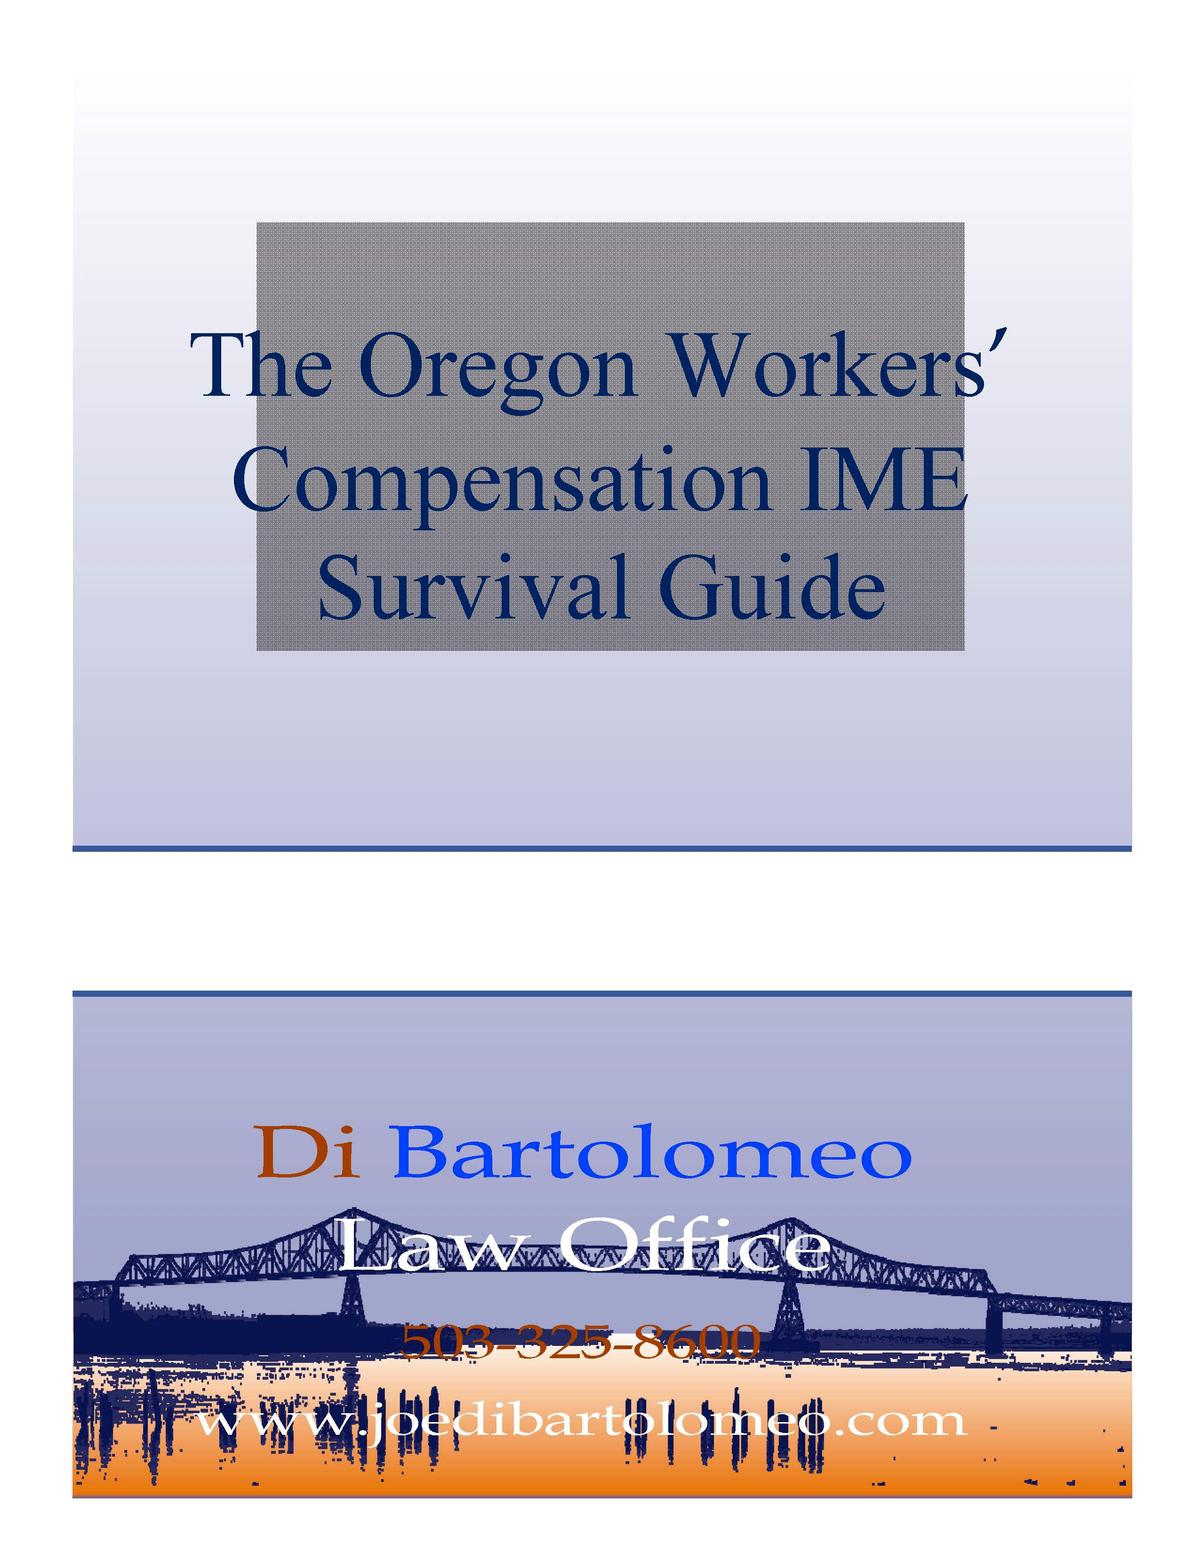 The Oregon Workers Compensation IME Survival Guide